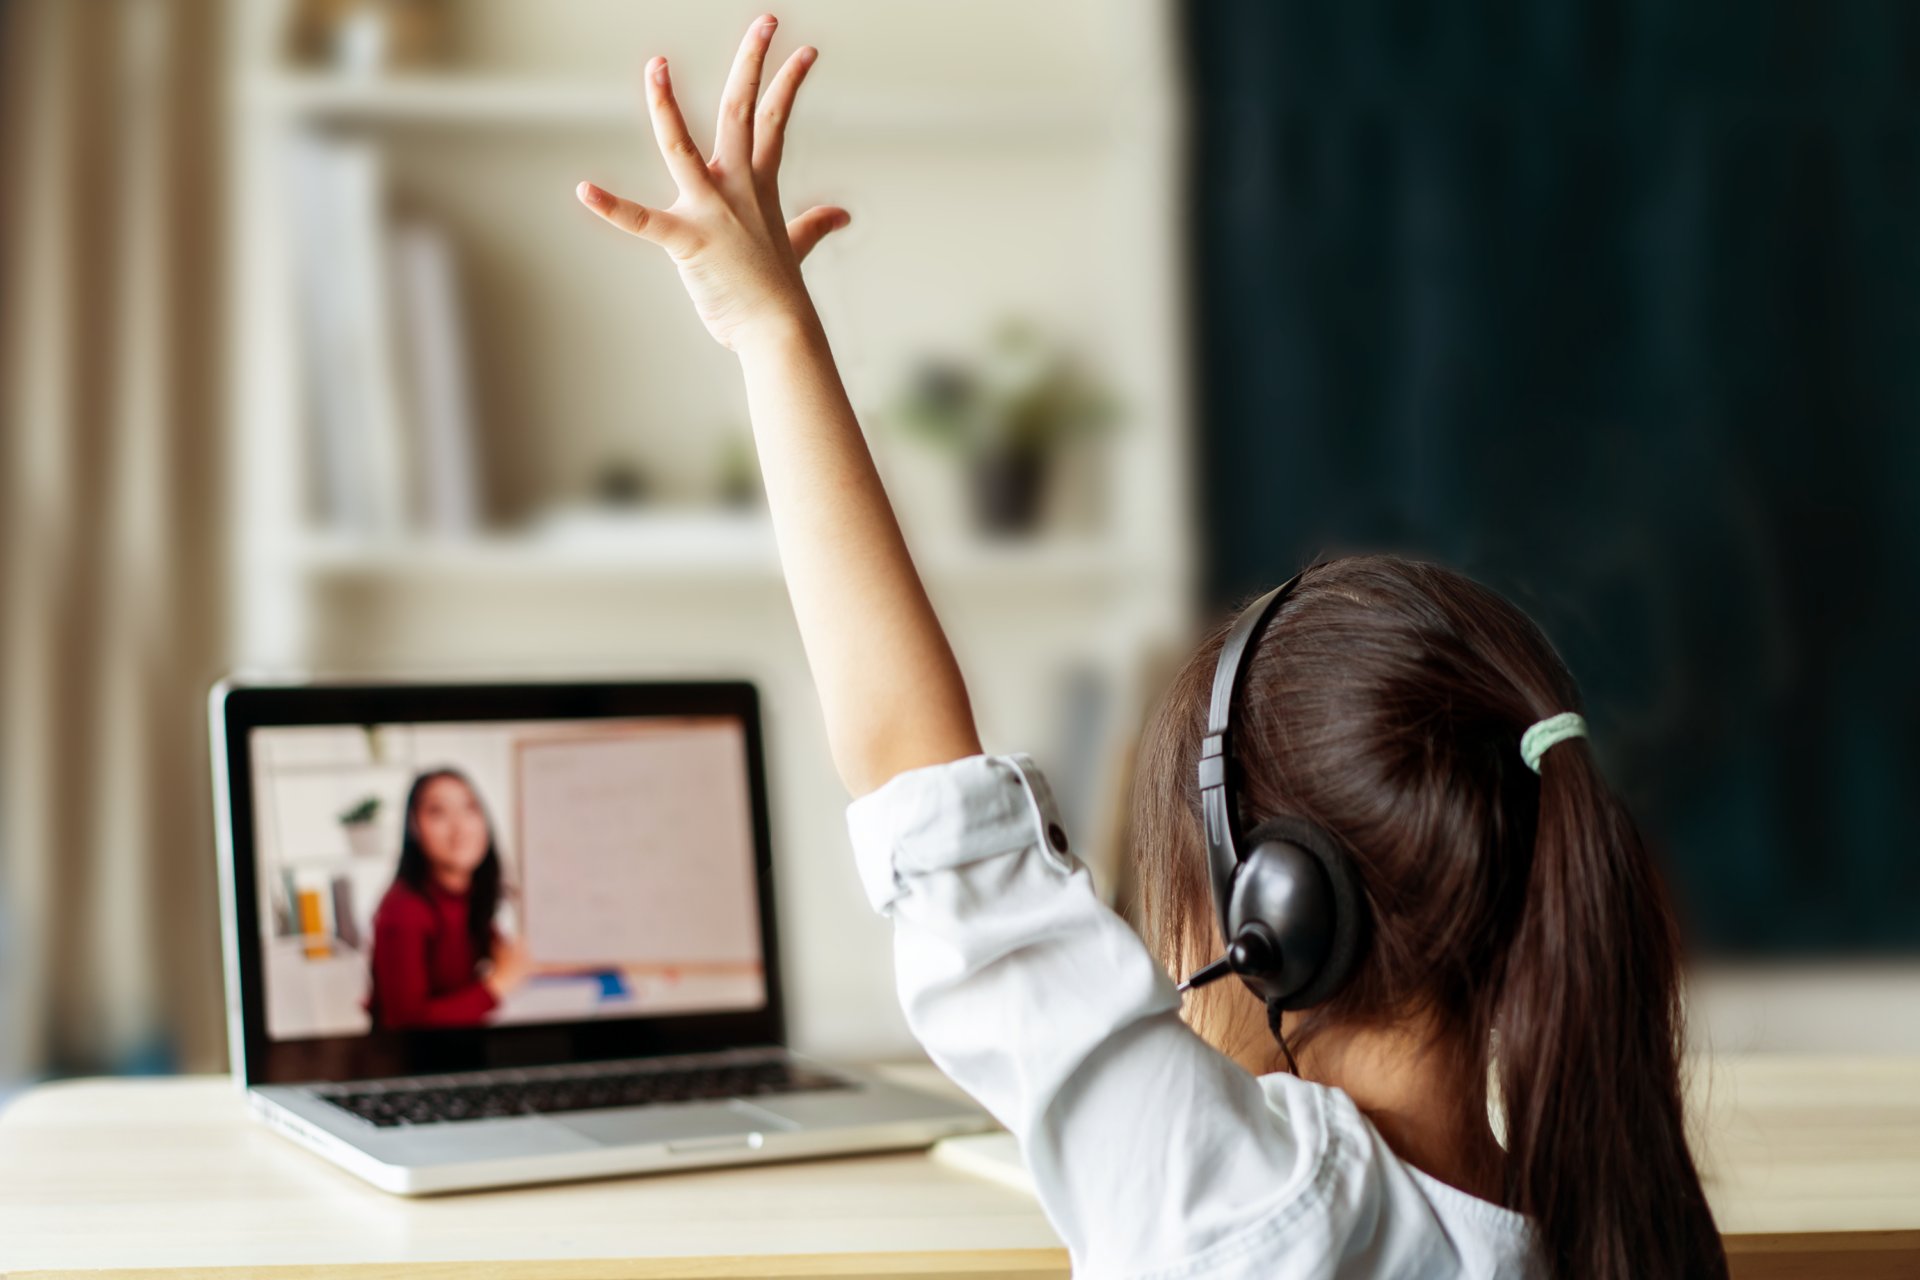 Young student wearing headphones raises hand while attending an online class on a laptop, viewed from behind, utilizing the LAUSD Amplify curriculum.